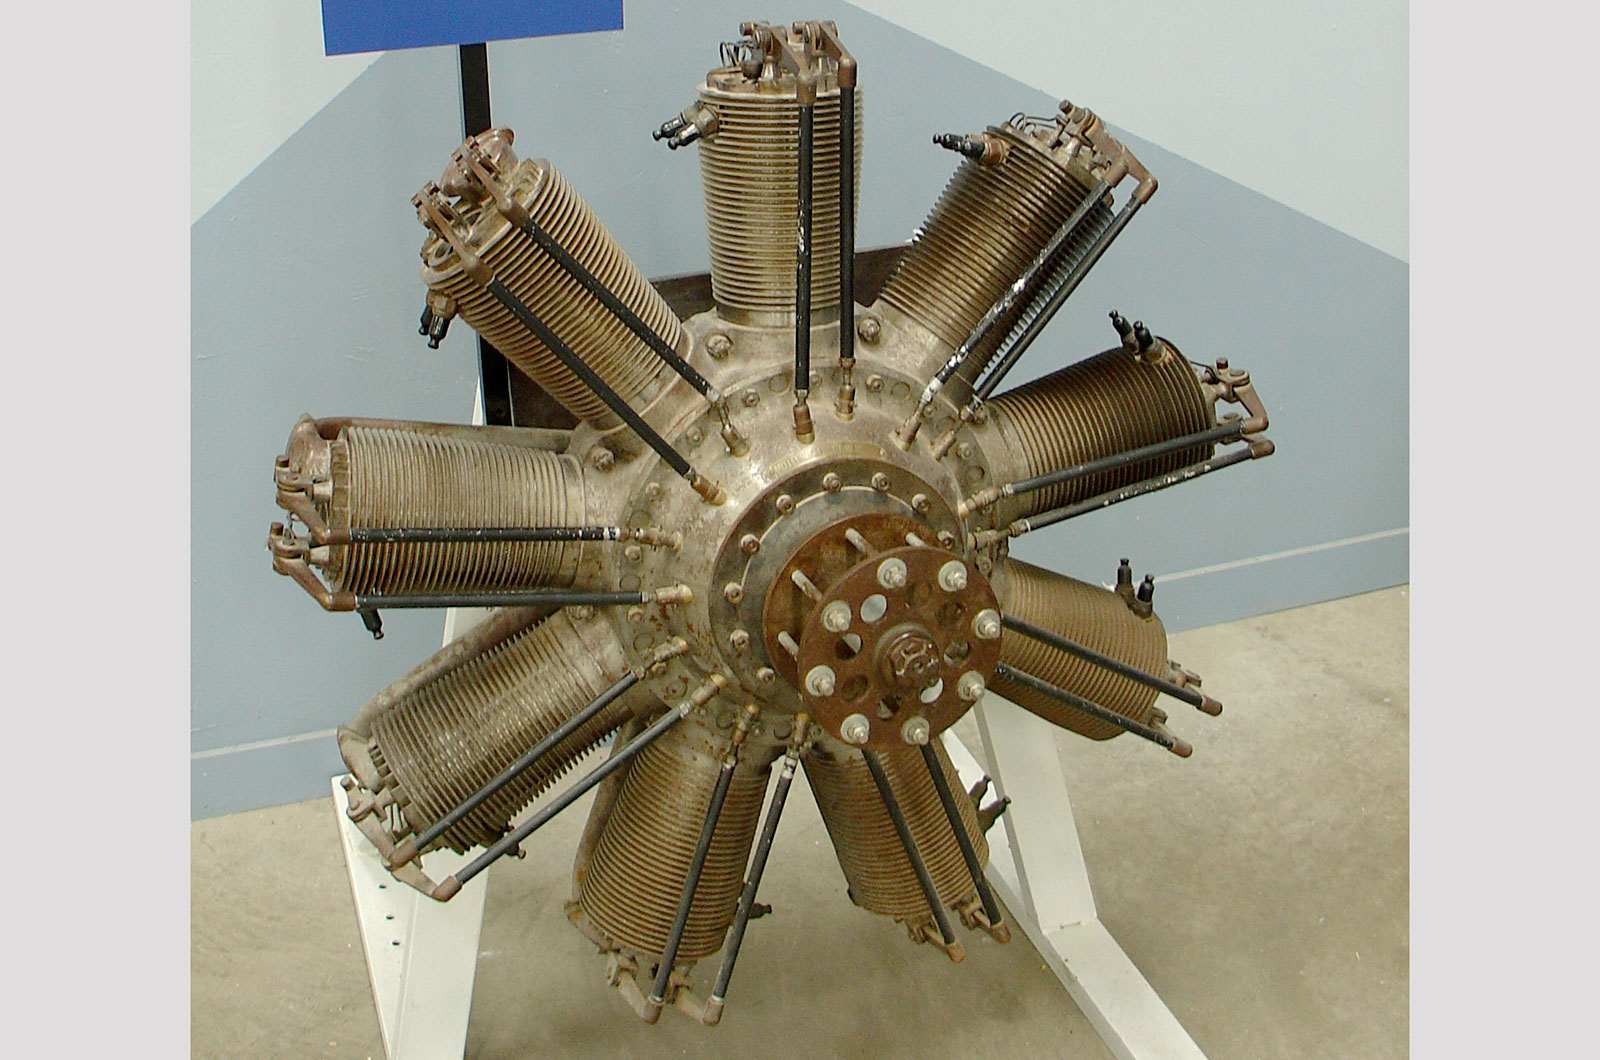 <p><span>During World War One, Bentley put his engineering prowess to use, by helping to develop aero engines with aluminum alloy pistons; shown here is a <strong>Clerget radial engine </strong>that he helped to engineer. His designs were more efficient as well as more reliable than anything already created and in recognition of his efforts, in the 1919 New Year’s Honours list he was awarded an MBE (Most Excellent Order of the British Empire) by the Queen, along with <strong>£8000 </strong>– around the equivalent of <strong>US$2 million </strong>today.</span></p>